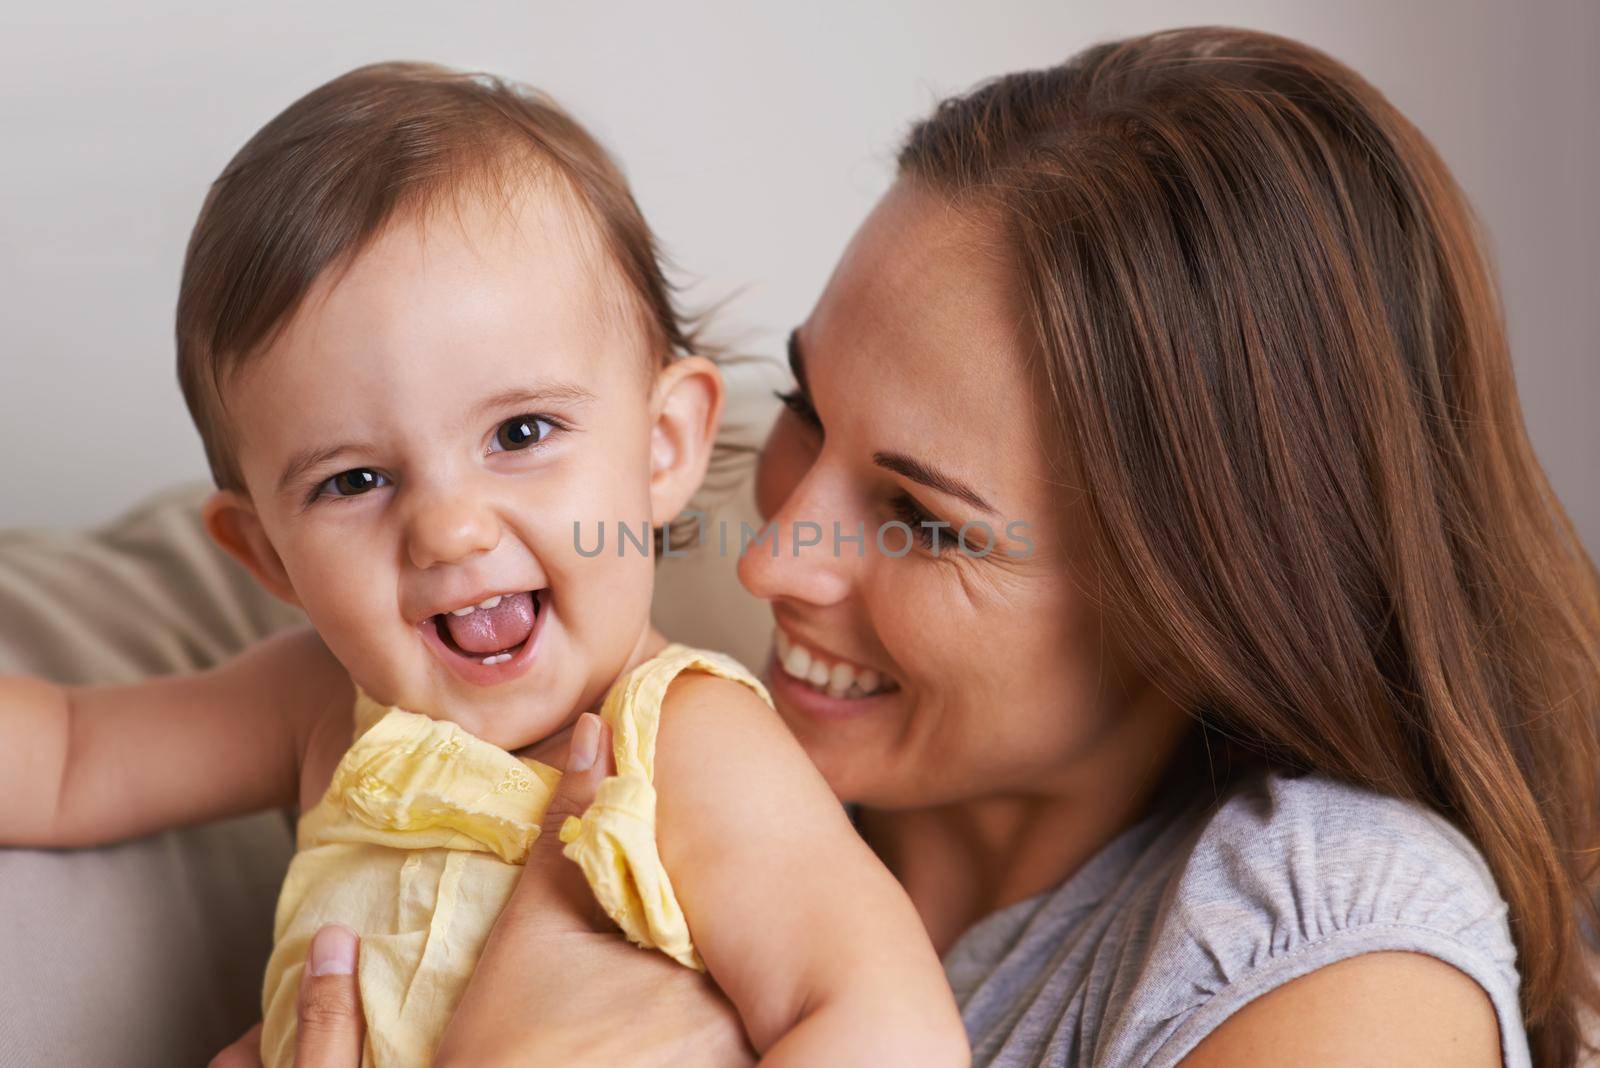 Closeup portrait of a mother and baby daughter laughing.